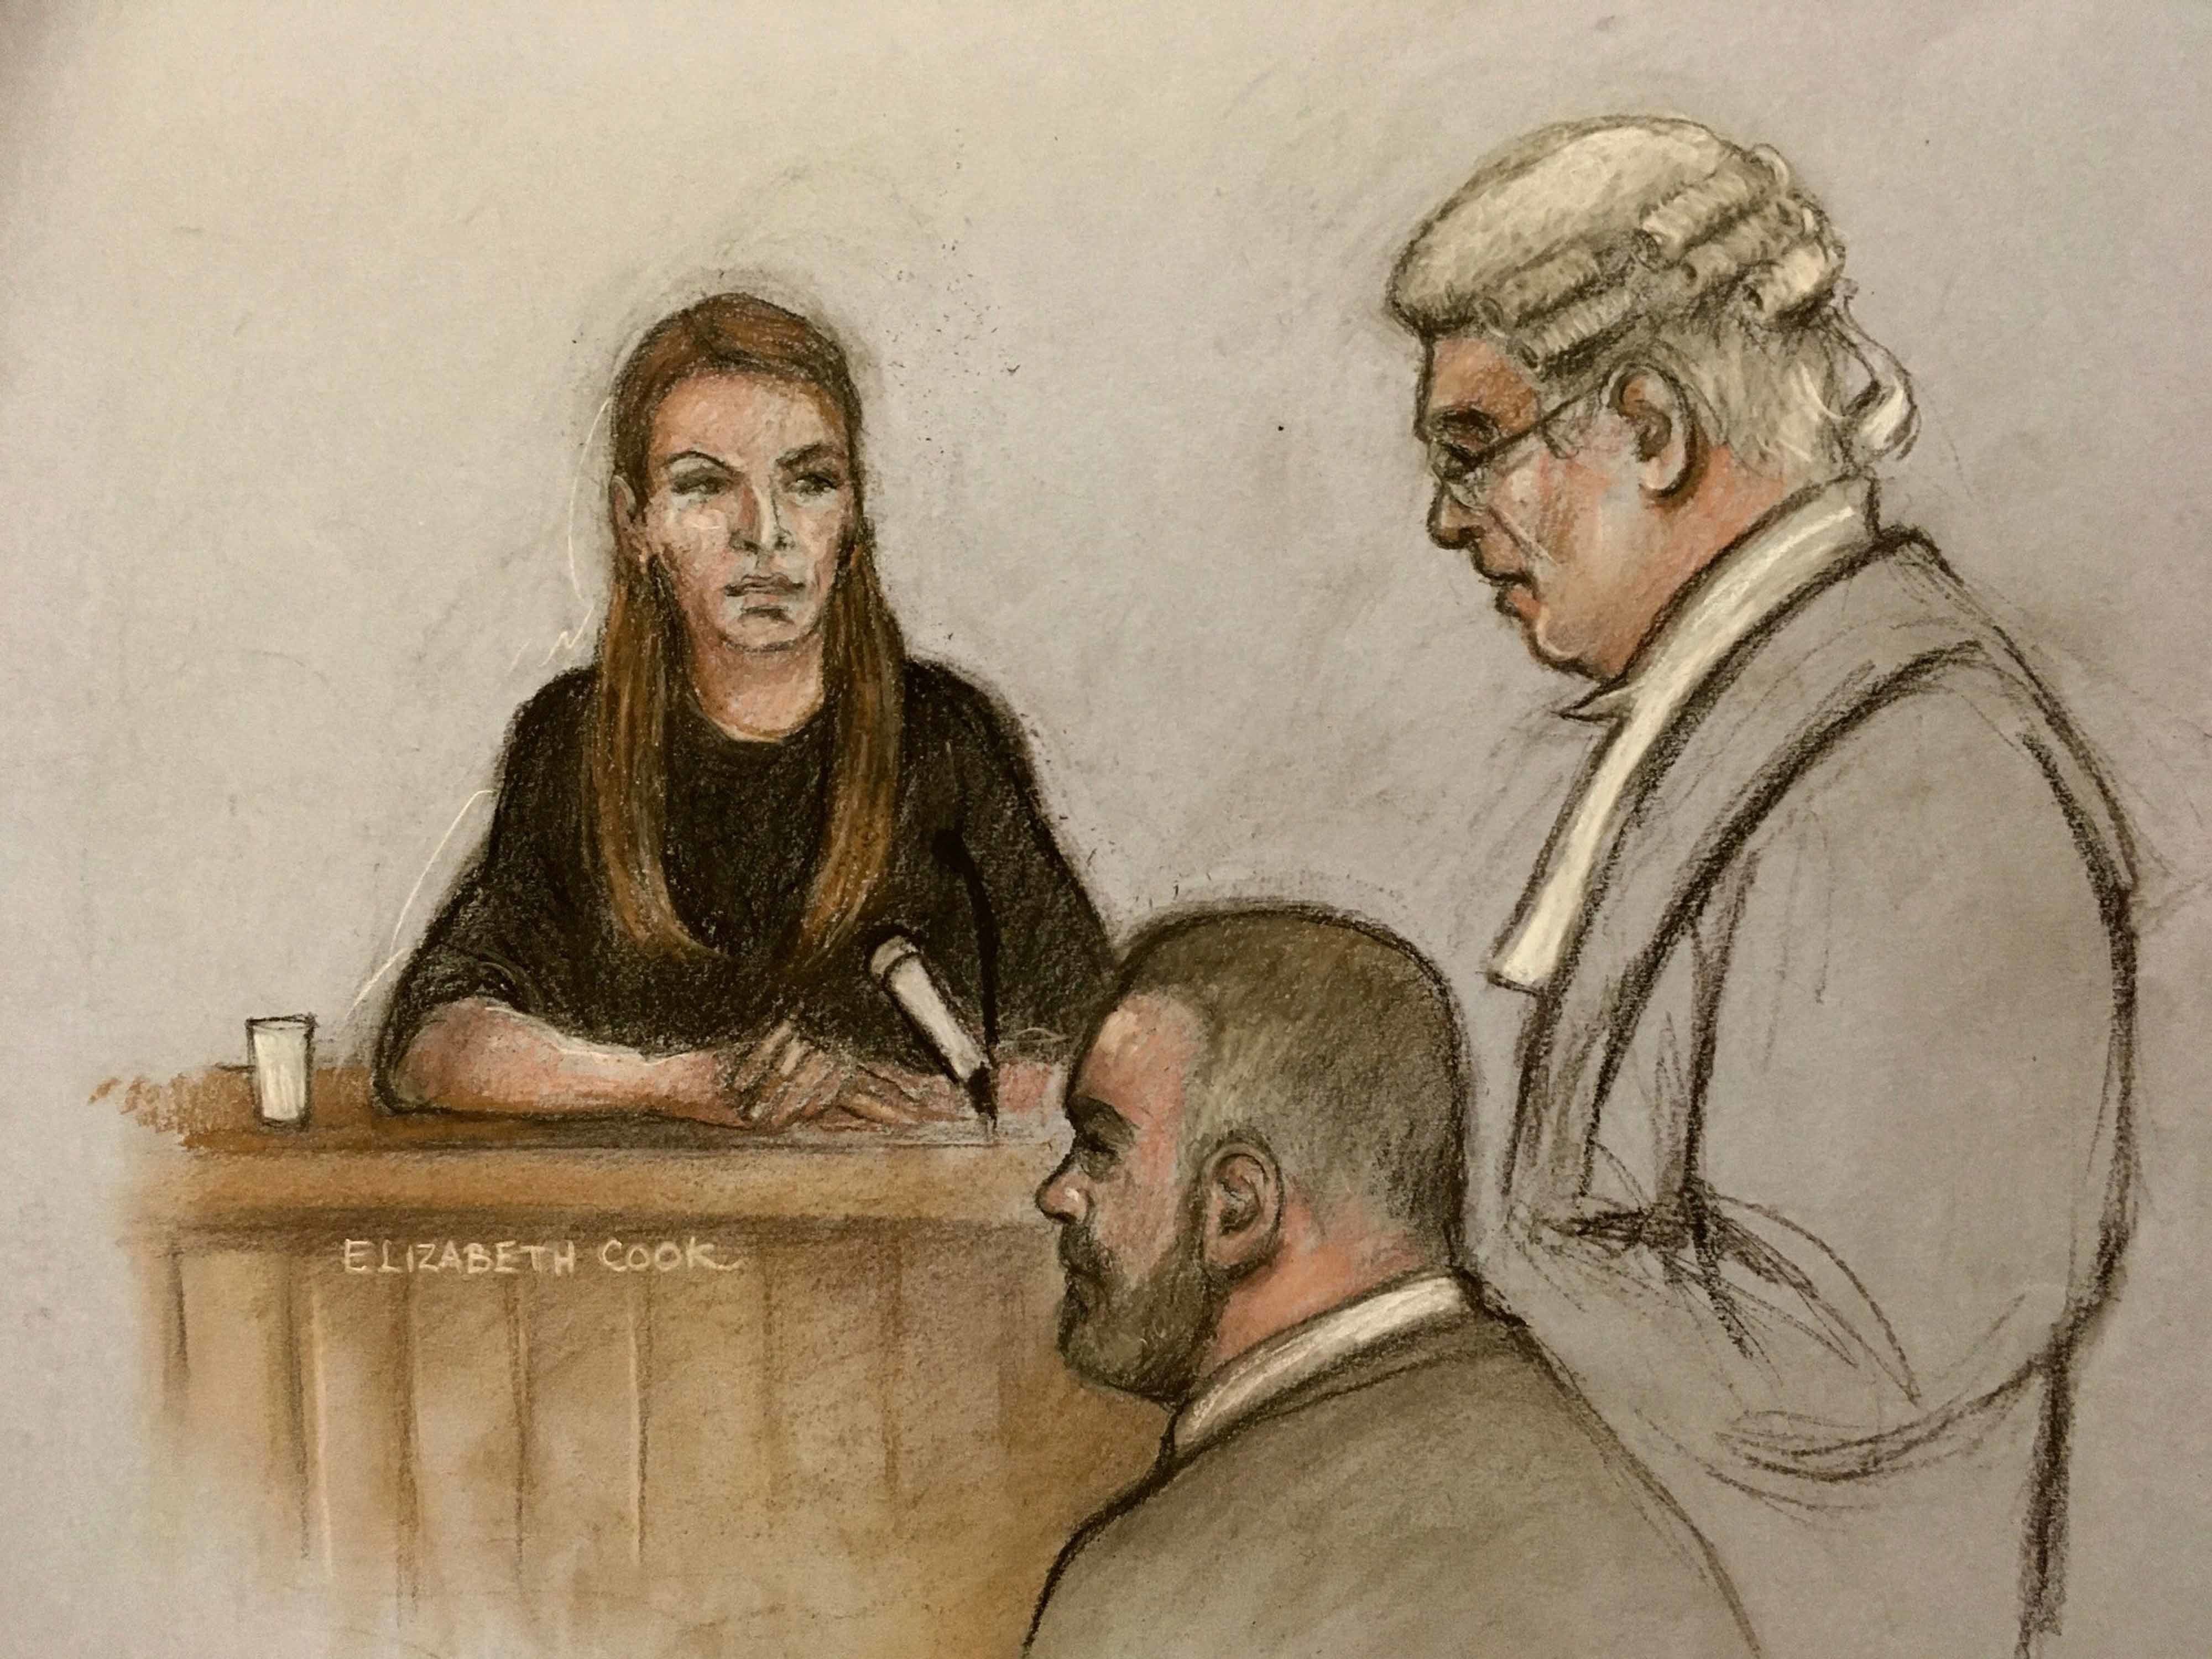 Coleen Rooney says she had no choice but to try to expose the source of the leak